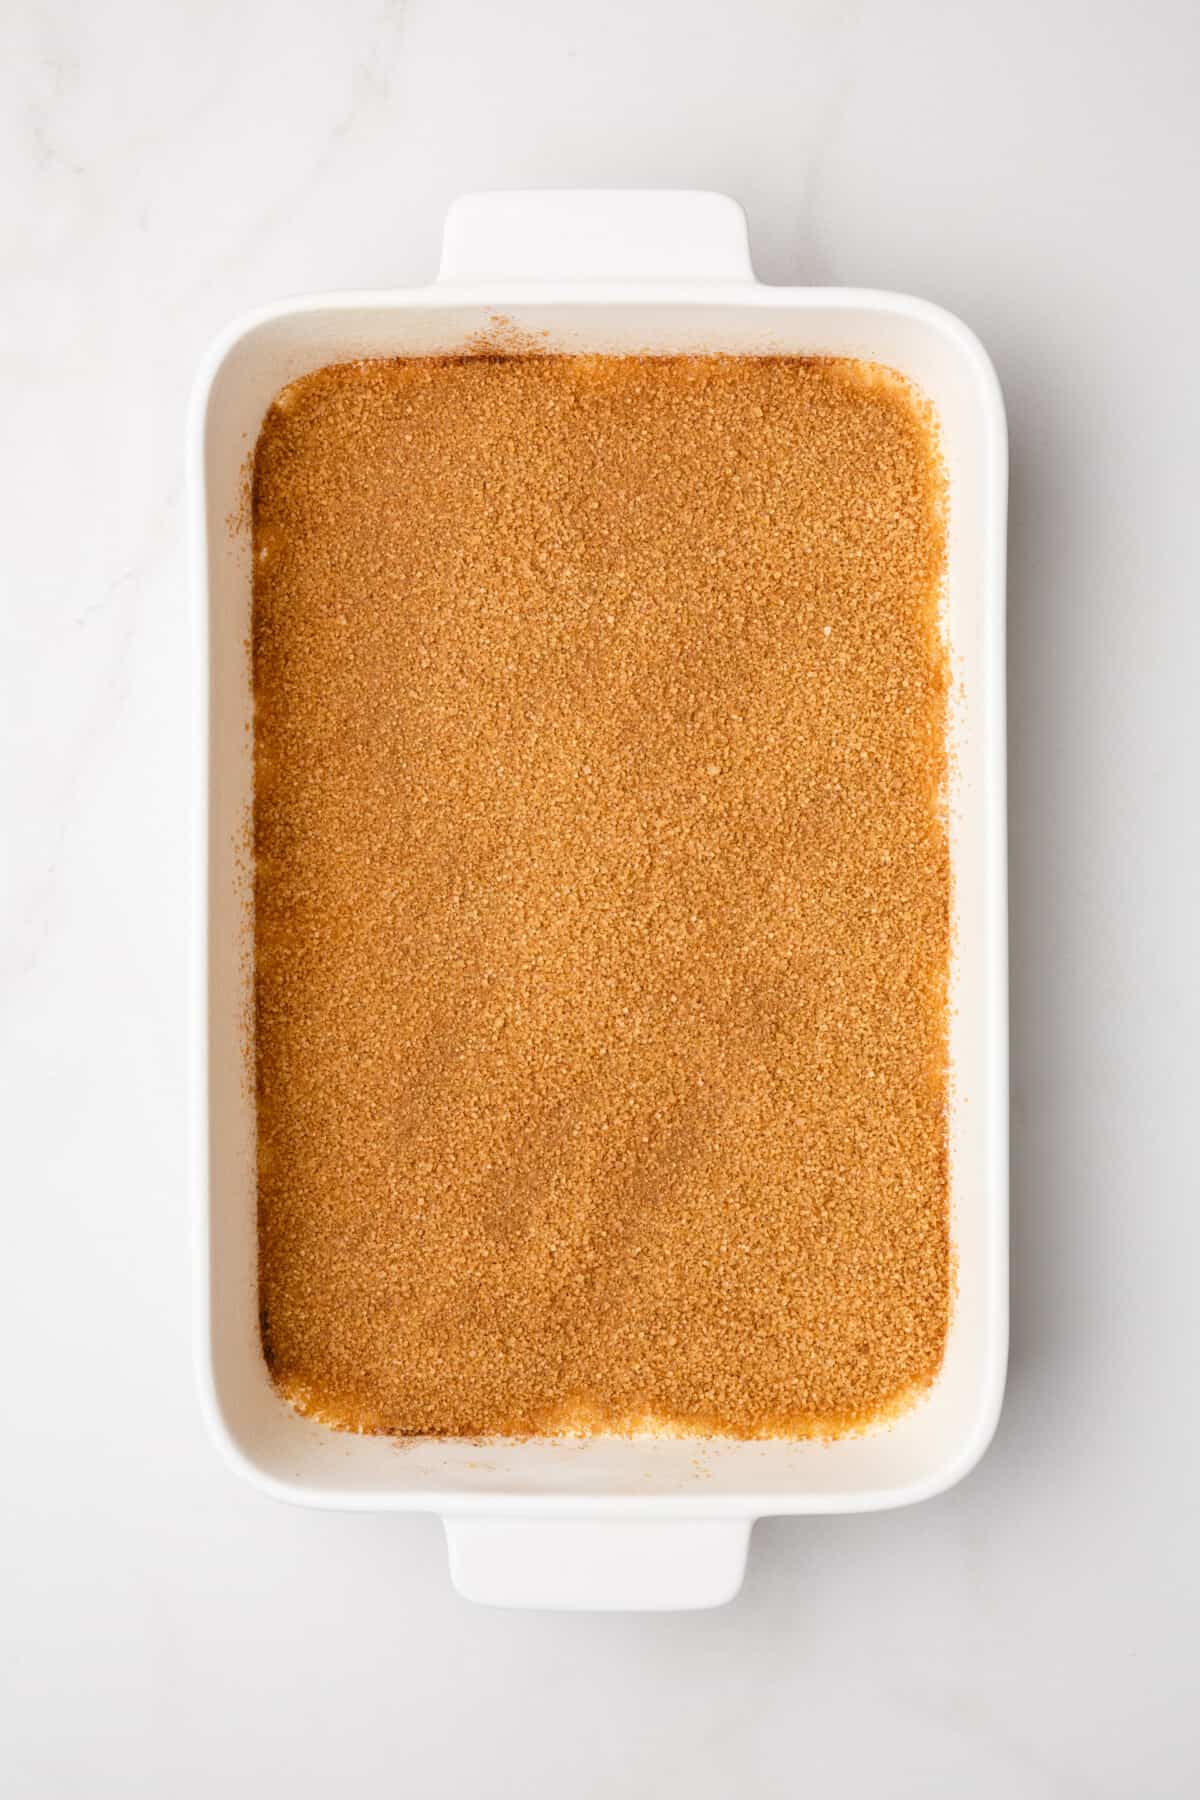 step 2 to make honey bun cake, sprinkle cinnamon sugar mix over the first layer of the cake.